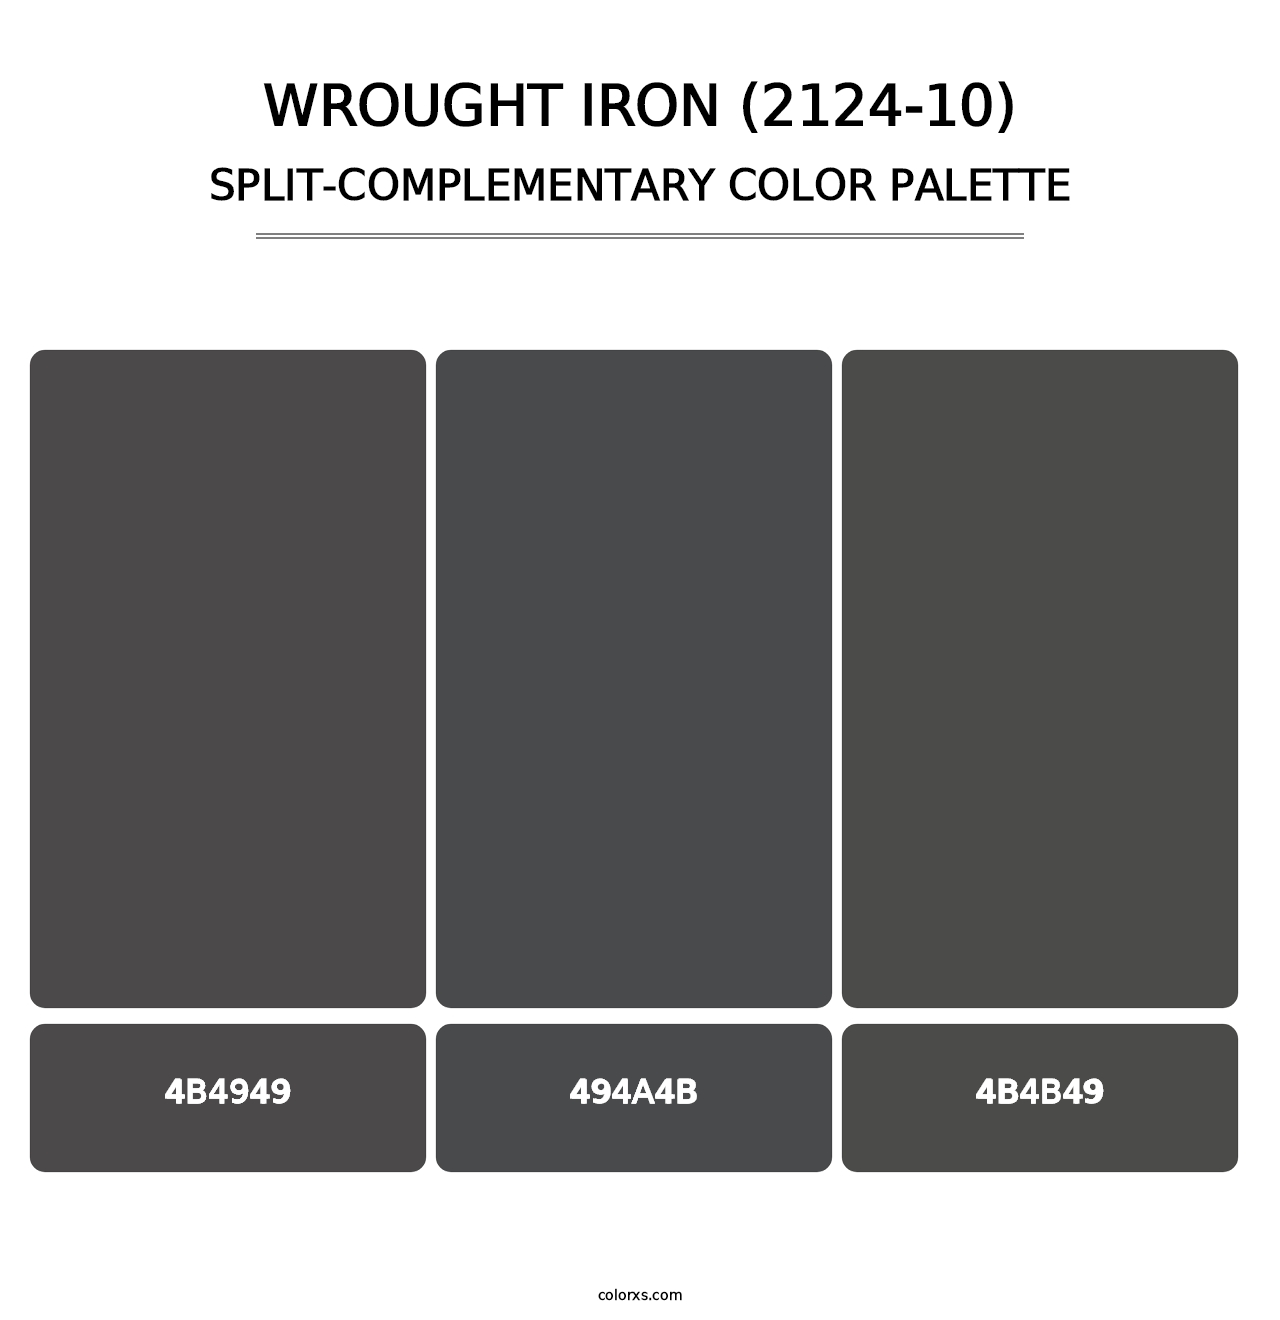 Wrought Iron (2124-10) - Split-Complementary Color Palette